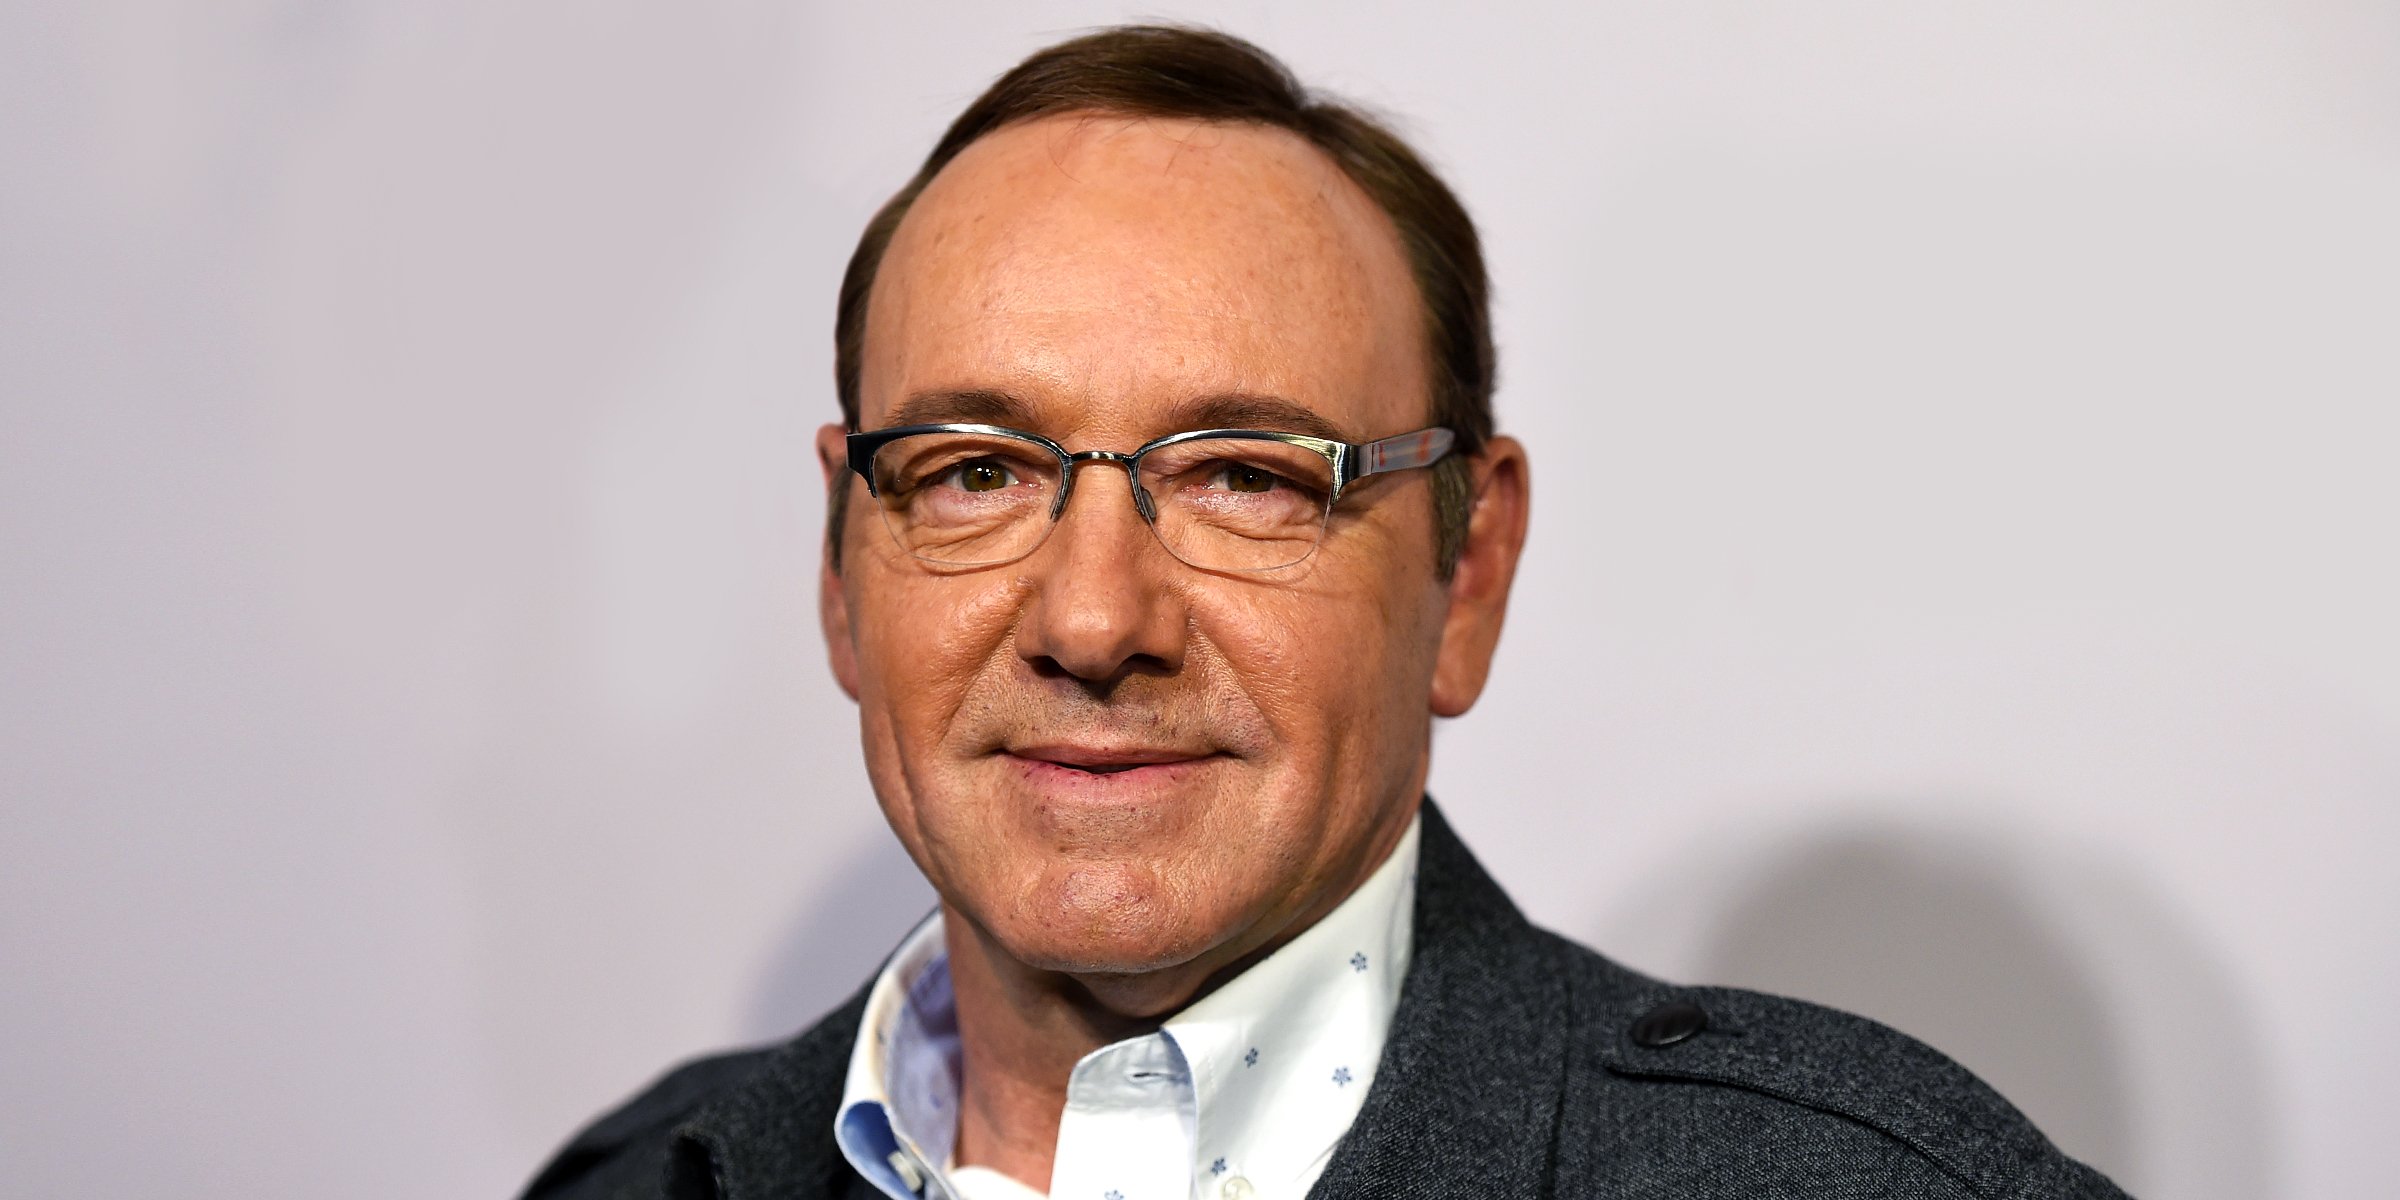 Kevin Spacey | Source: Getty Images 